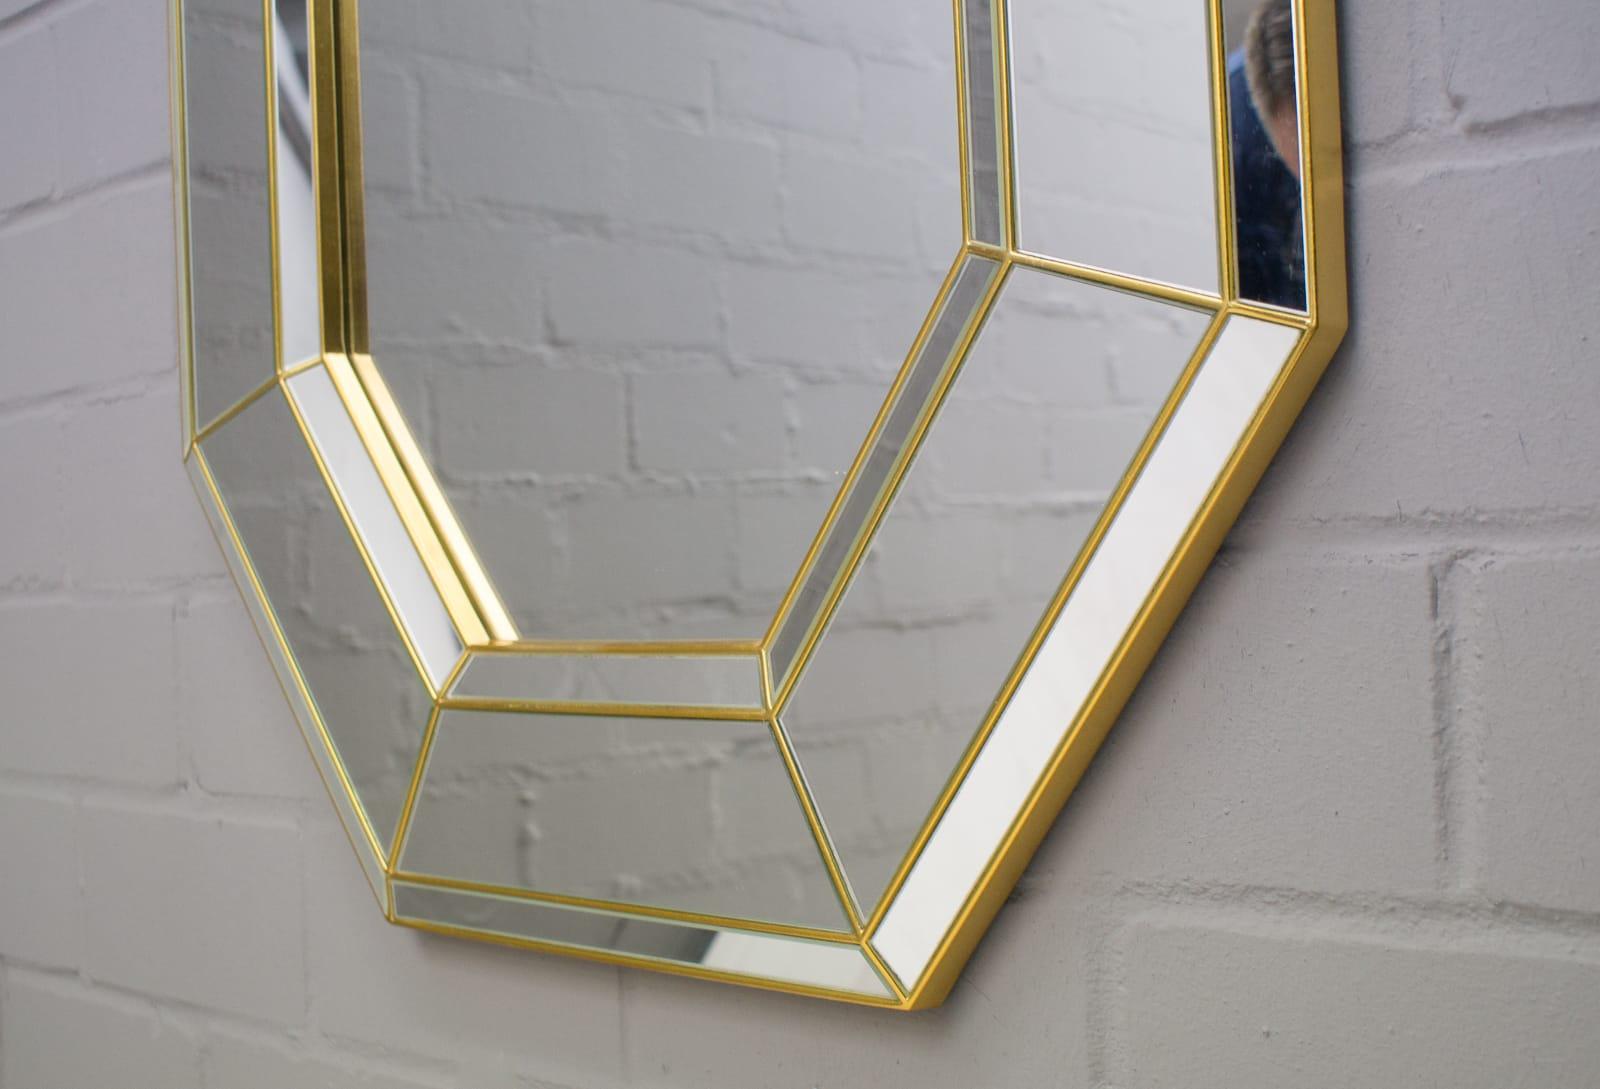 Hollywood Regency Large Octagonal Wall Mirror in Gold, Belgium, 1990s For Sale